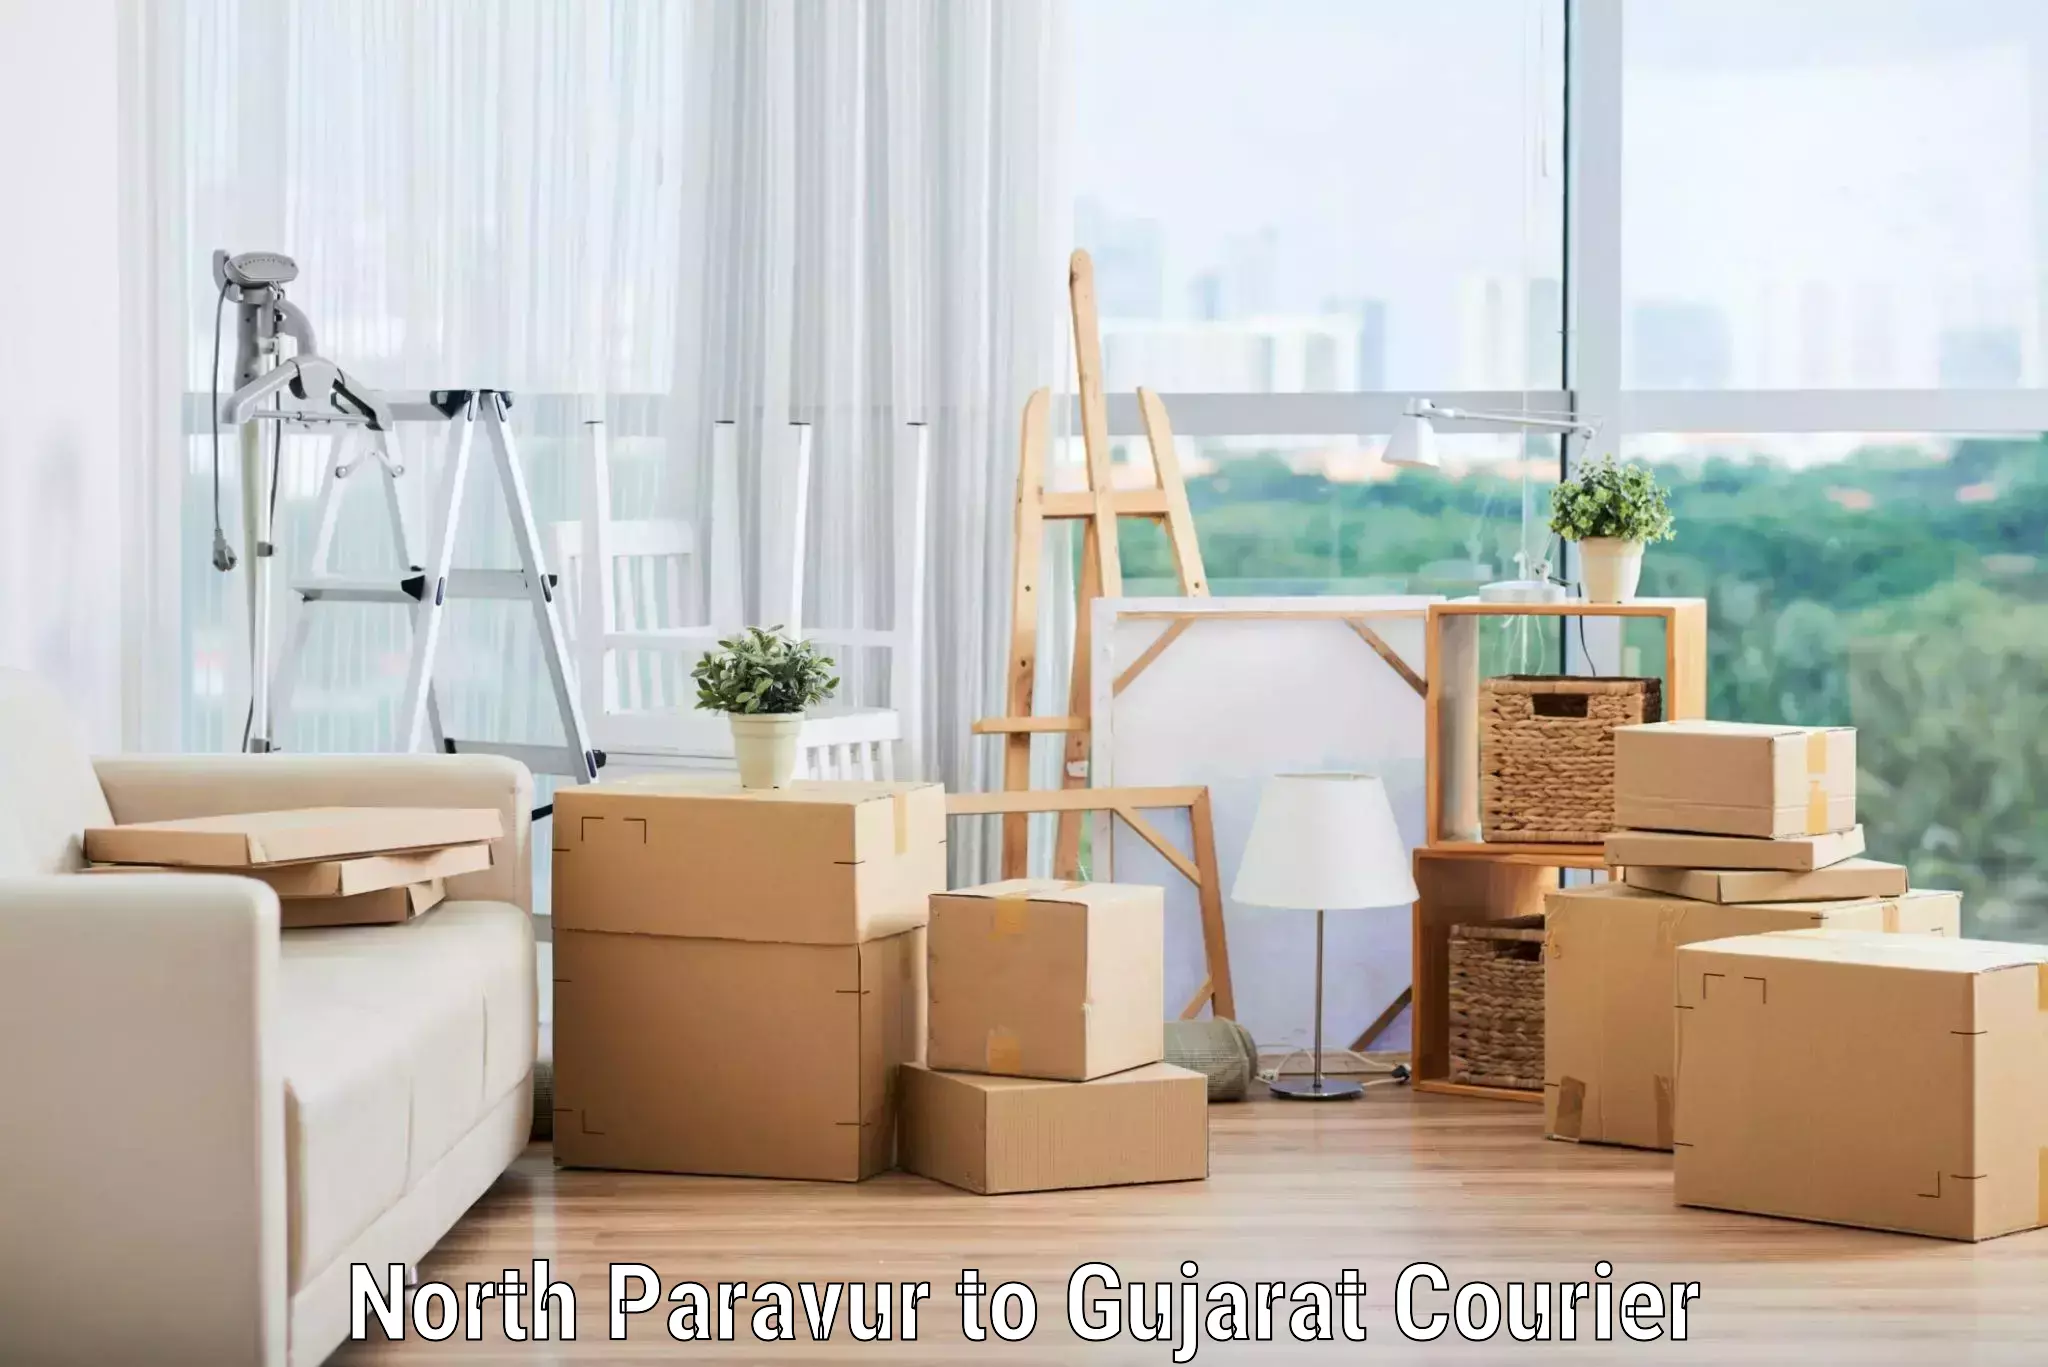 Full-service household moving North Paravur to Ahmedabad